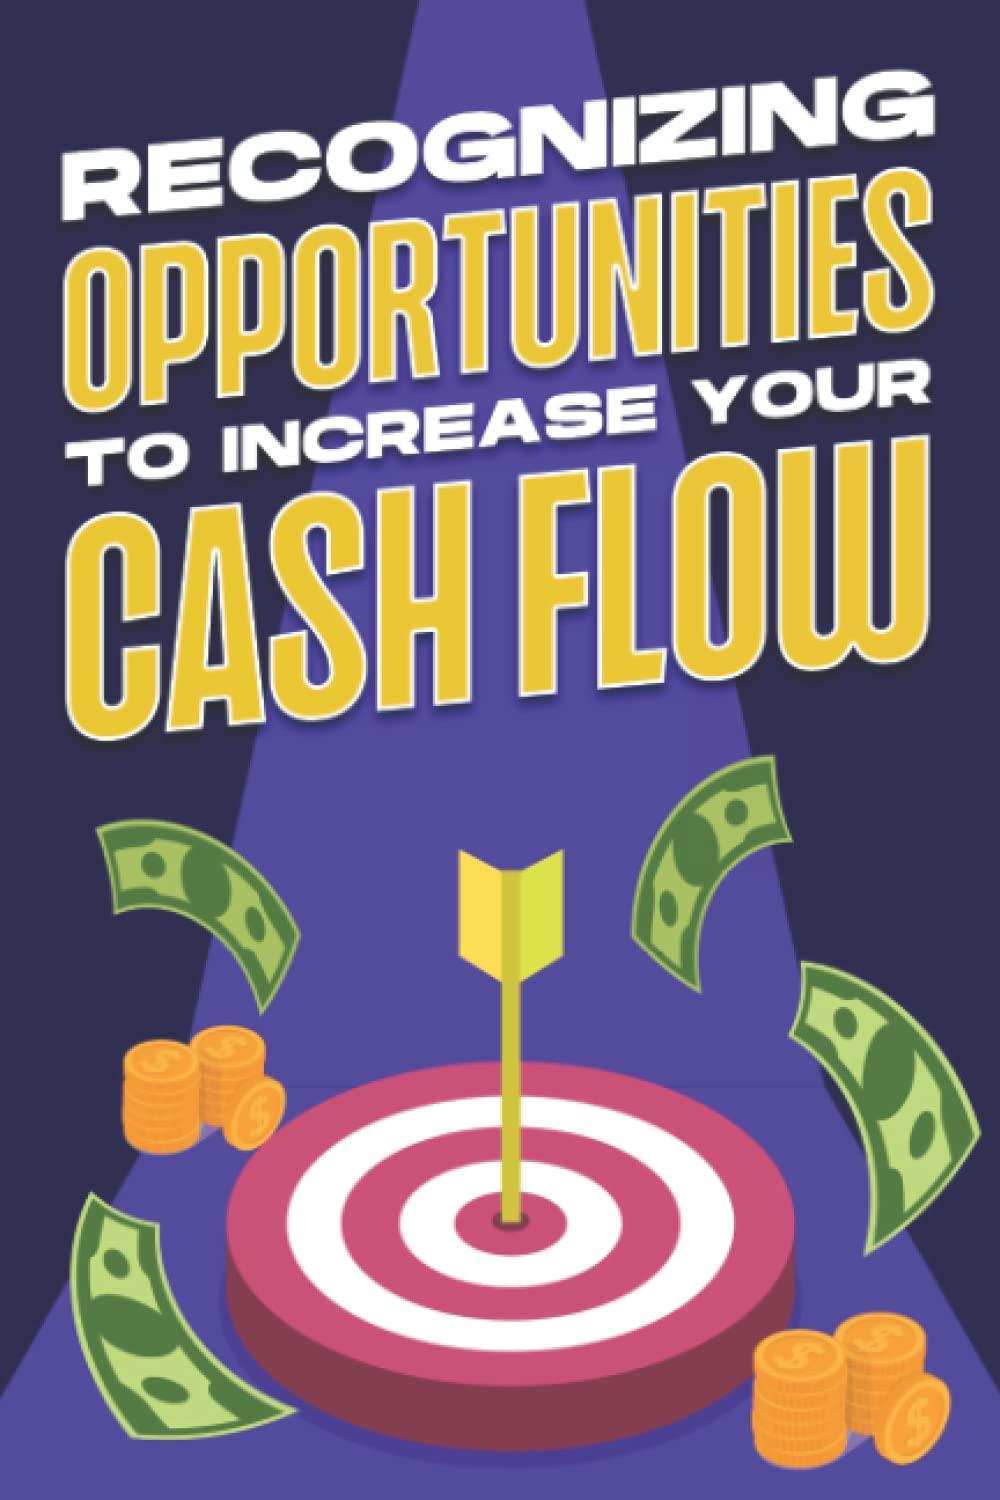 rrecognizing opportunities to increase your cash flow 1st edition d.k. hawkins b0bpgmwcwp, 979-8367619058